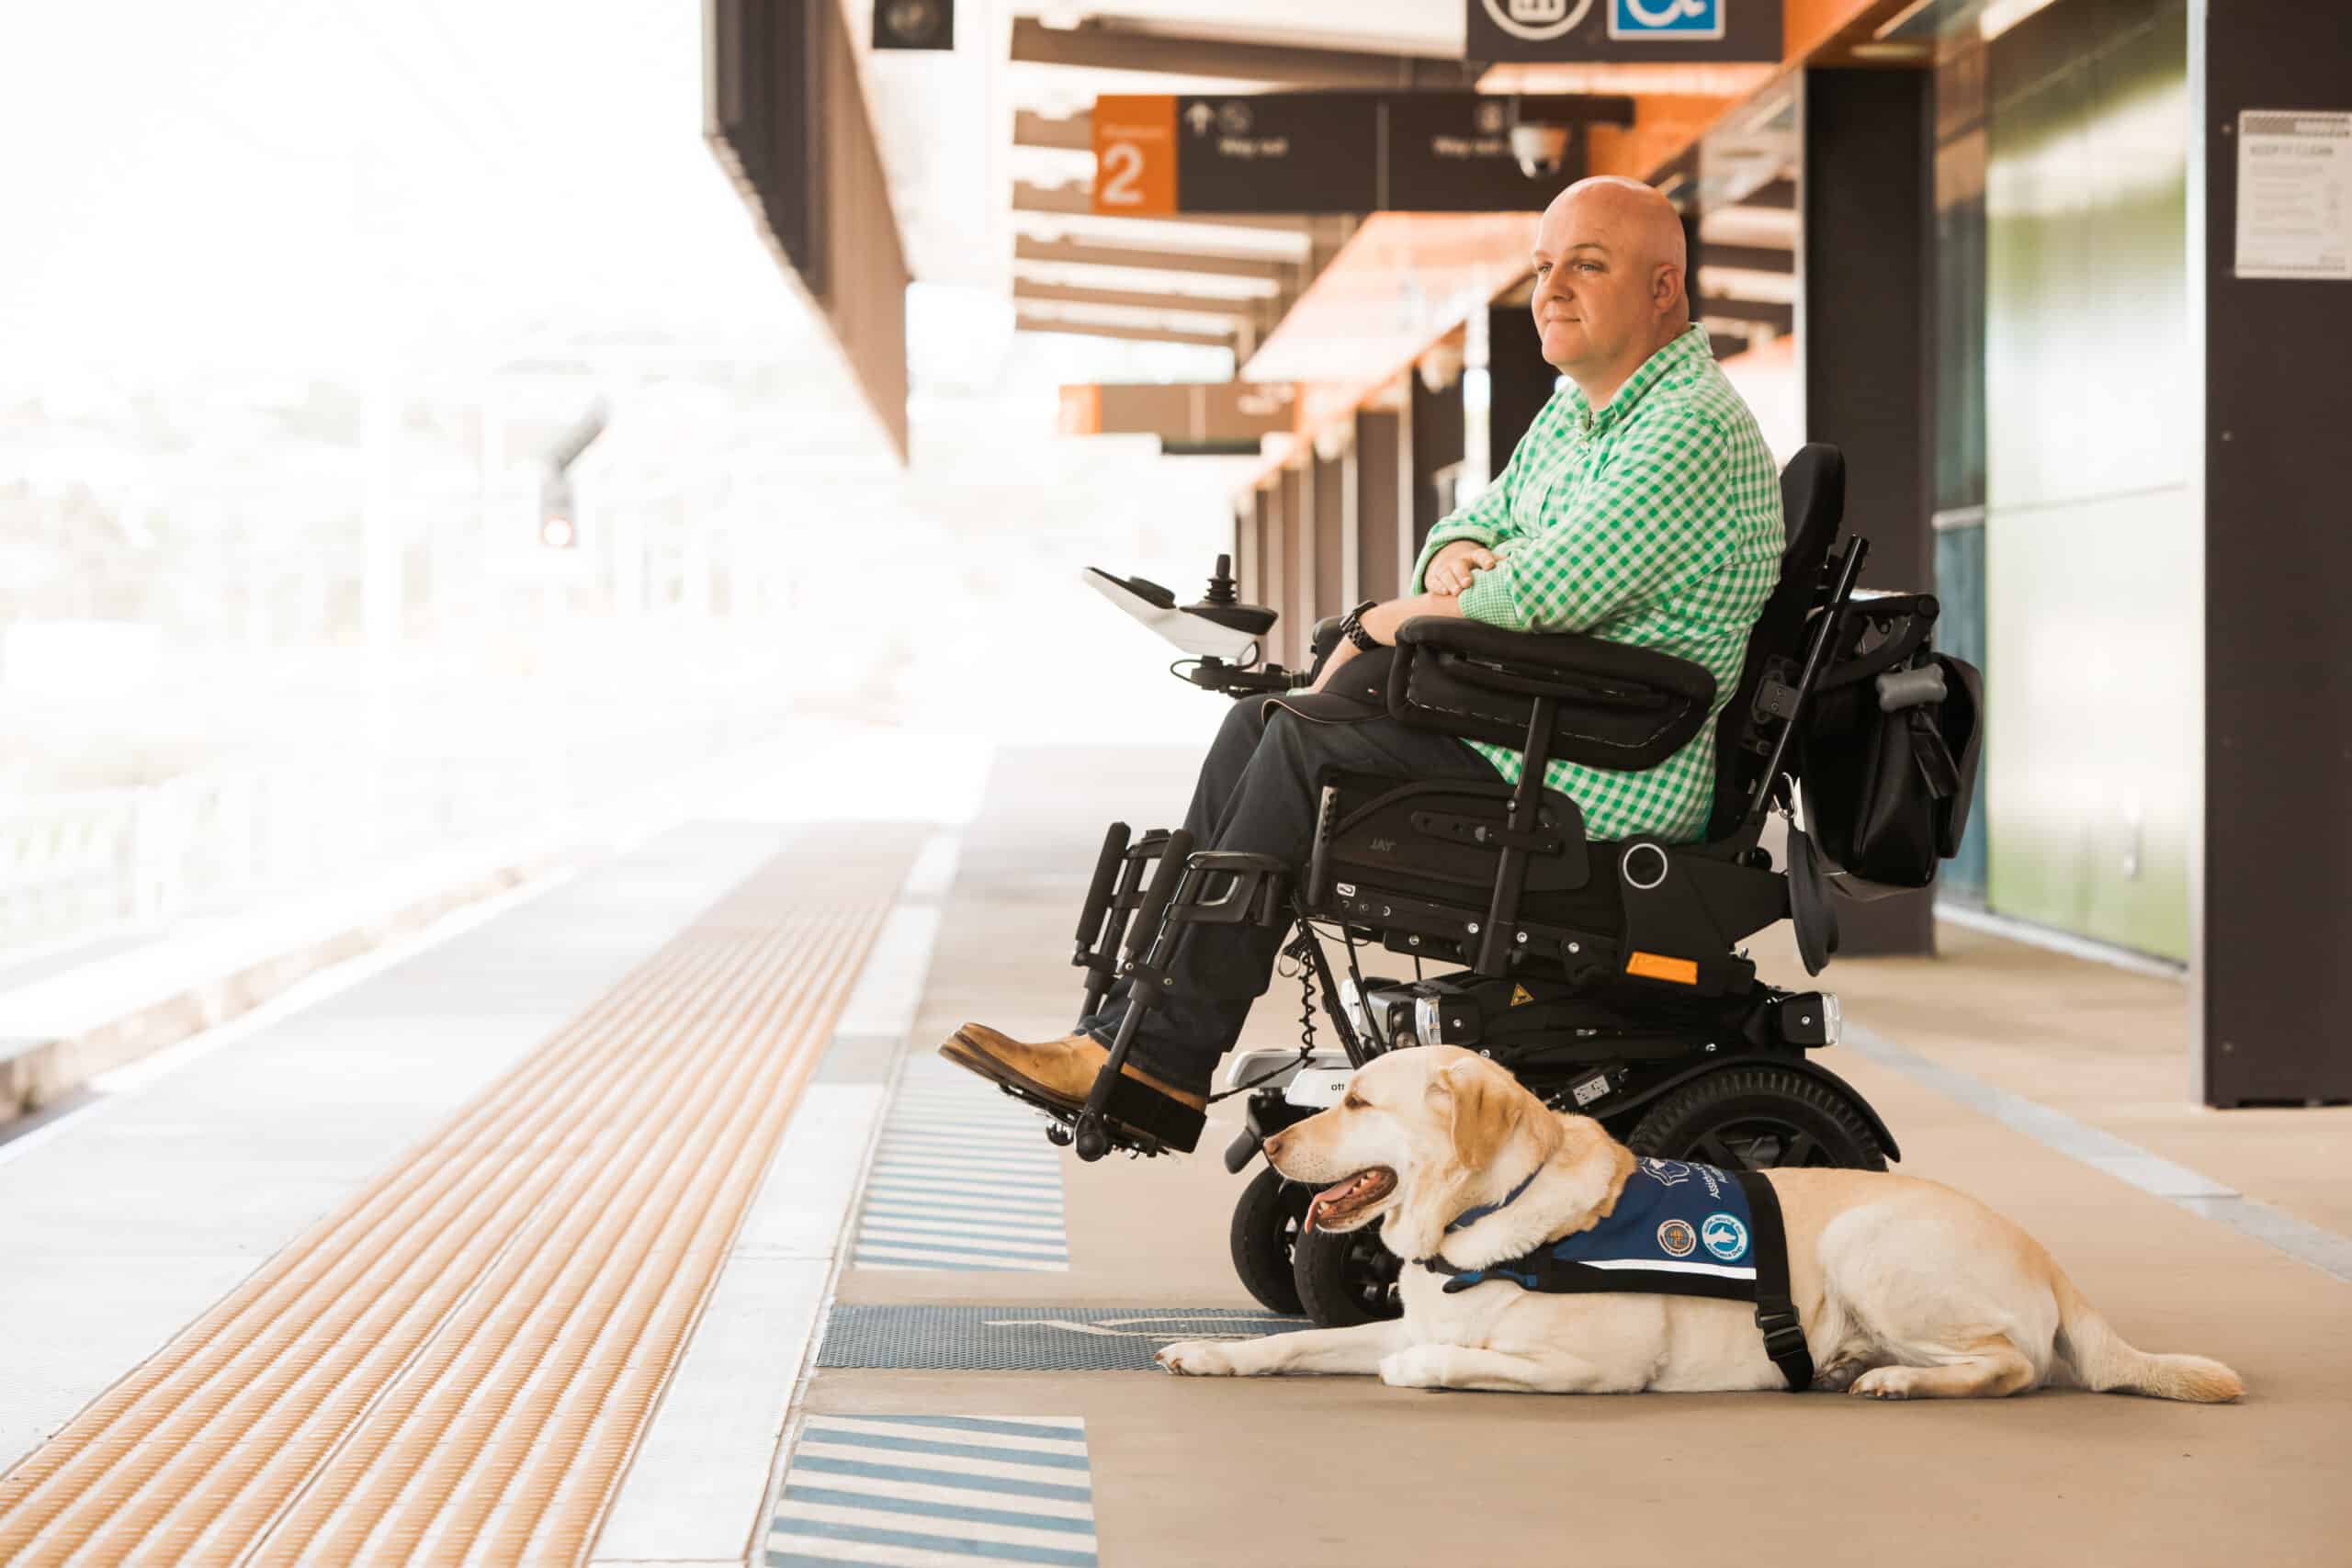 Tim McCallum's assistance dog in training is not funded by the NDIS